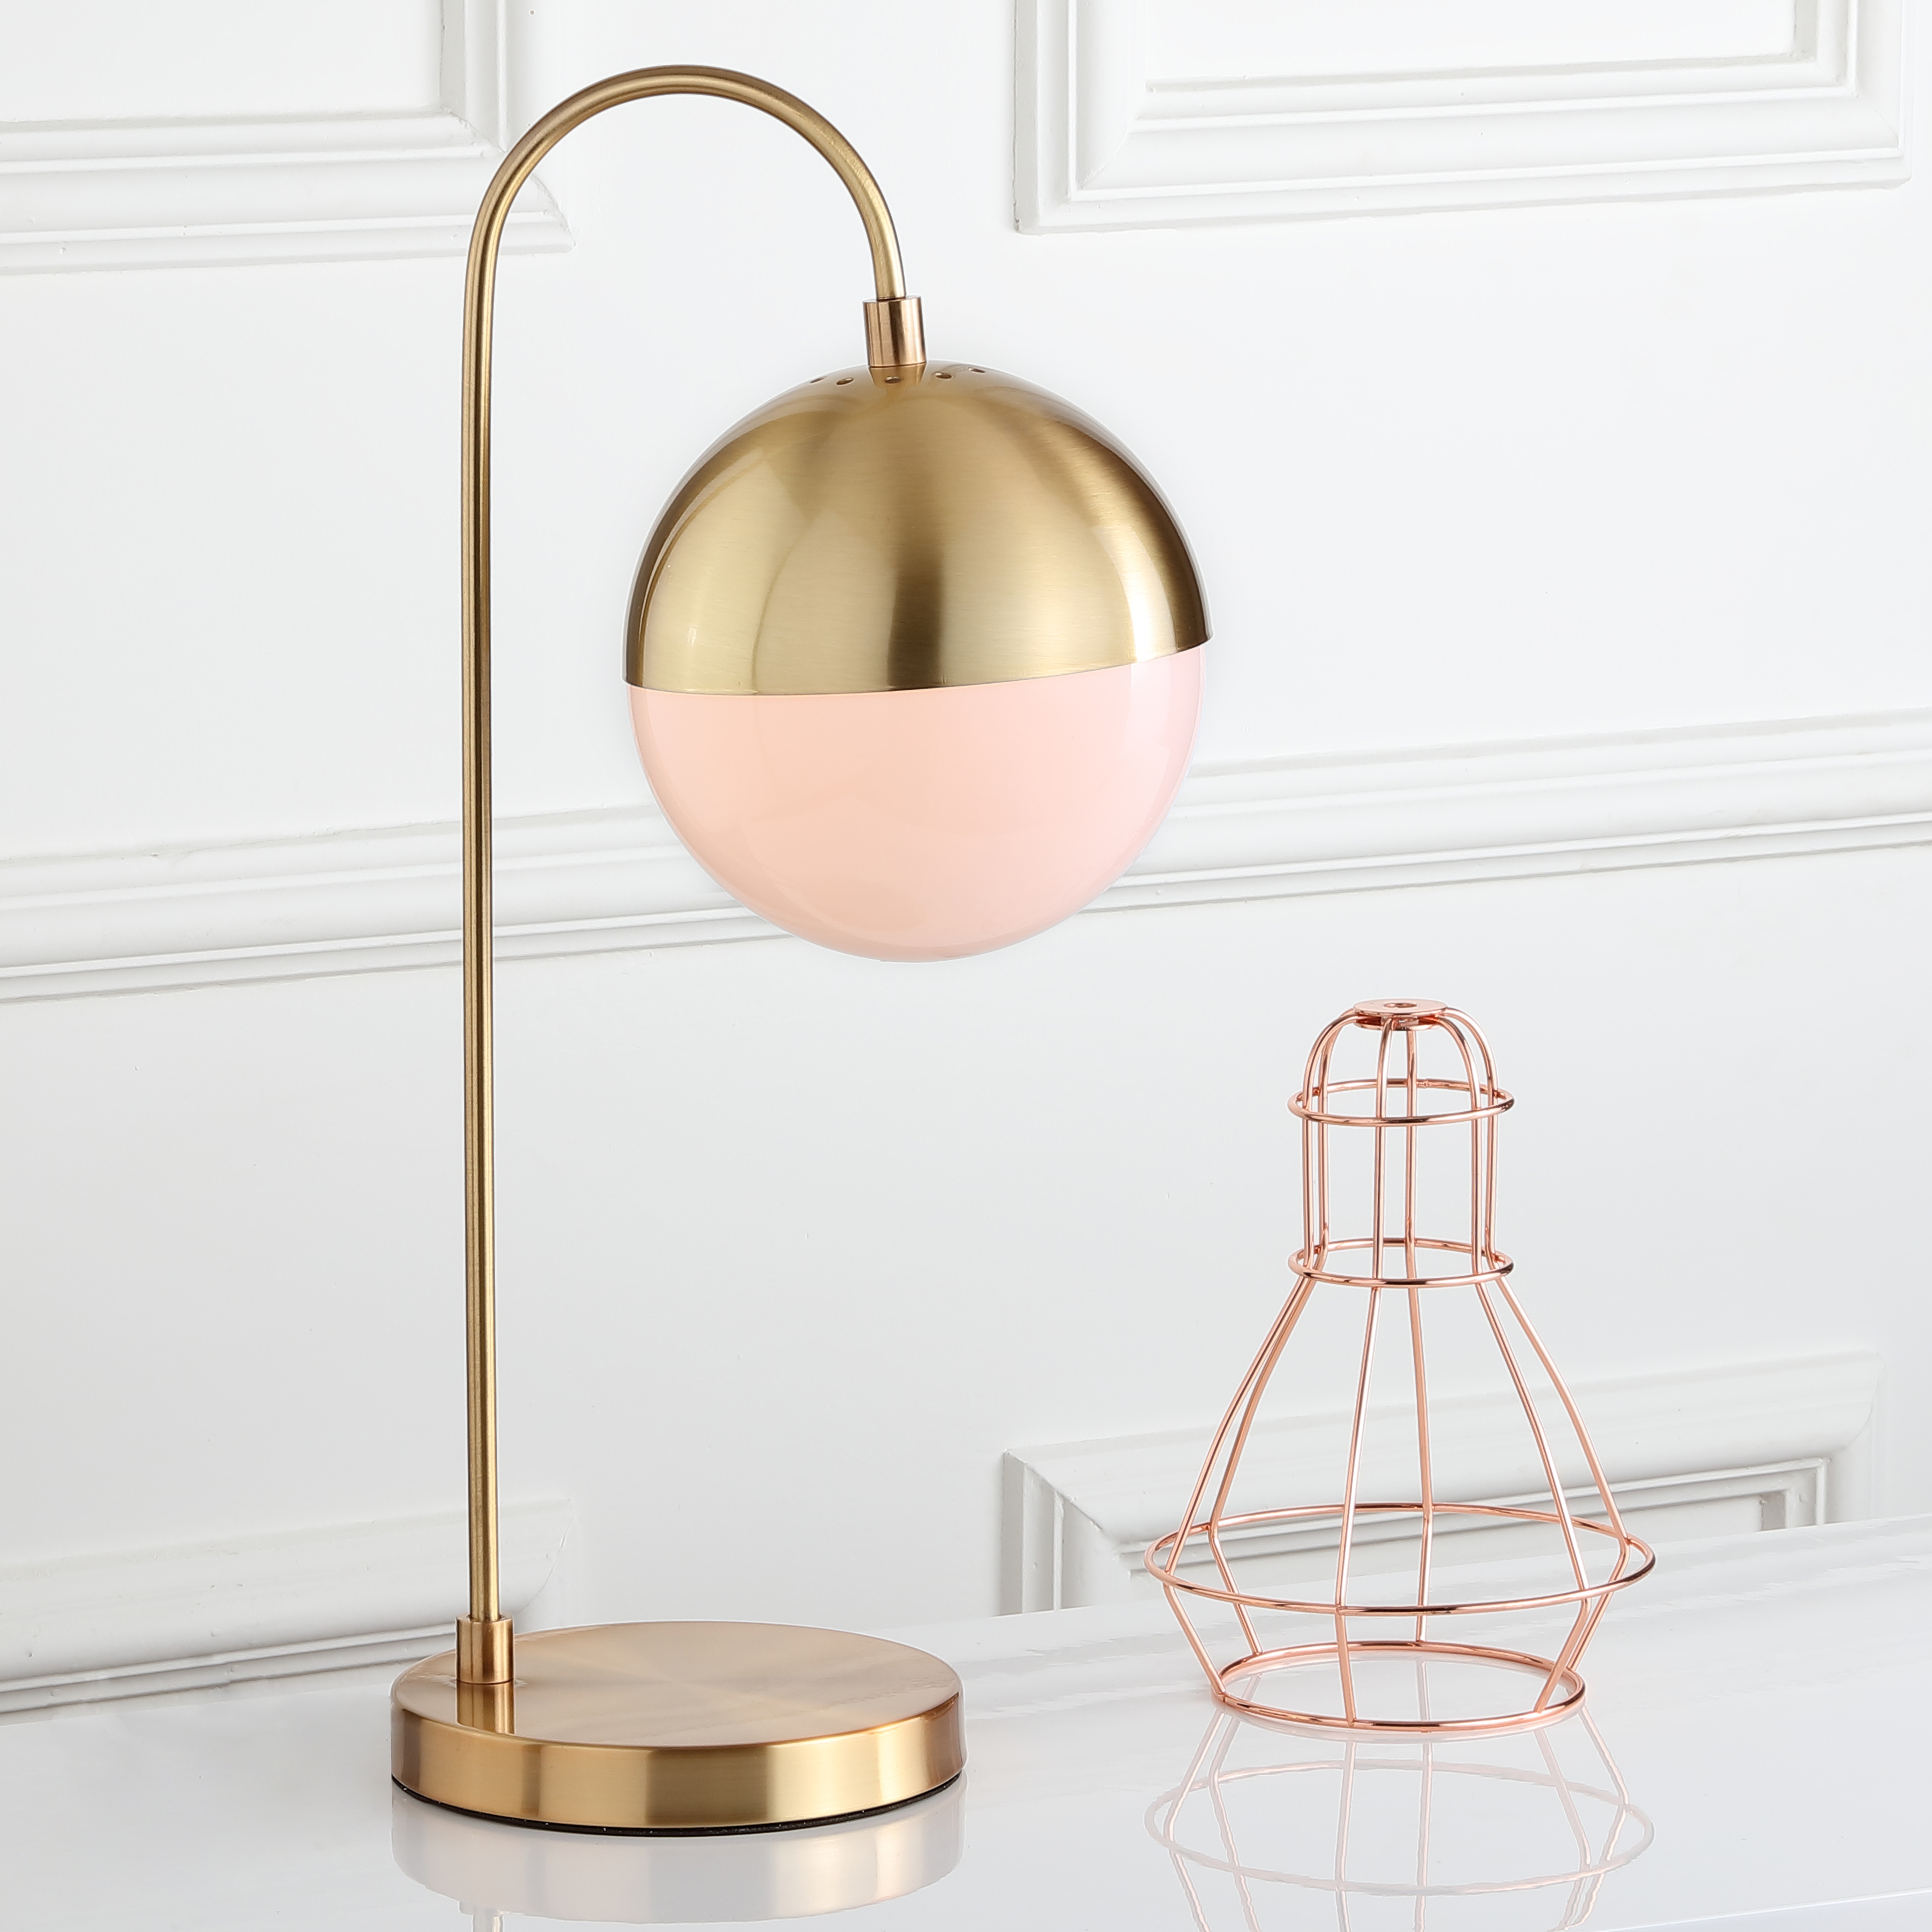 Cappi 20.5-Inch H Table Lamp - Brass Gold - Arlo Home - Arlo Home